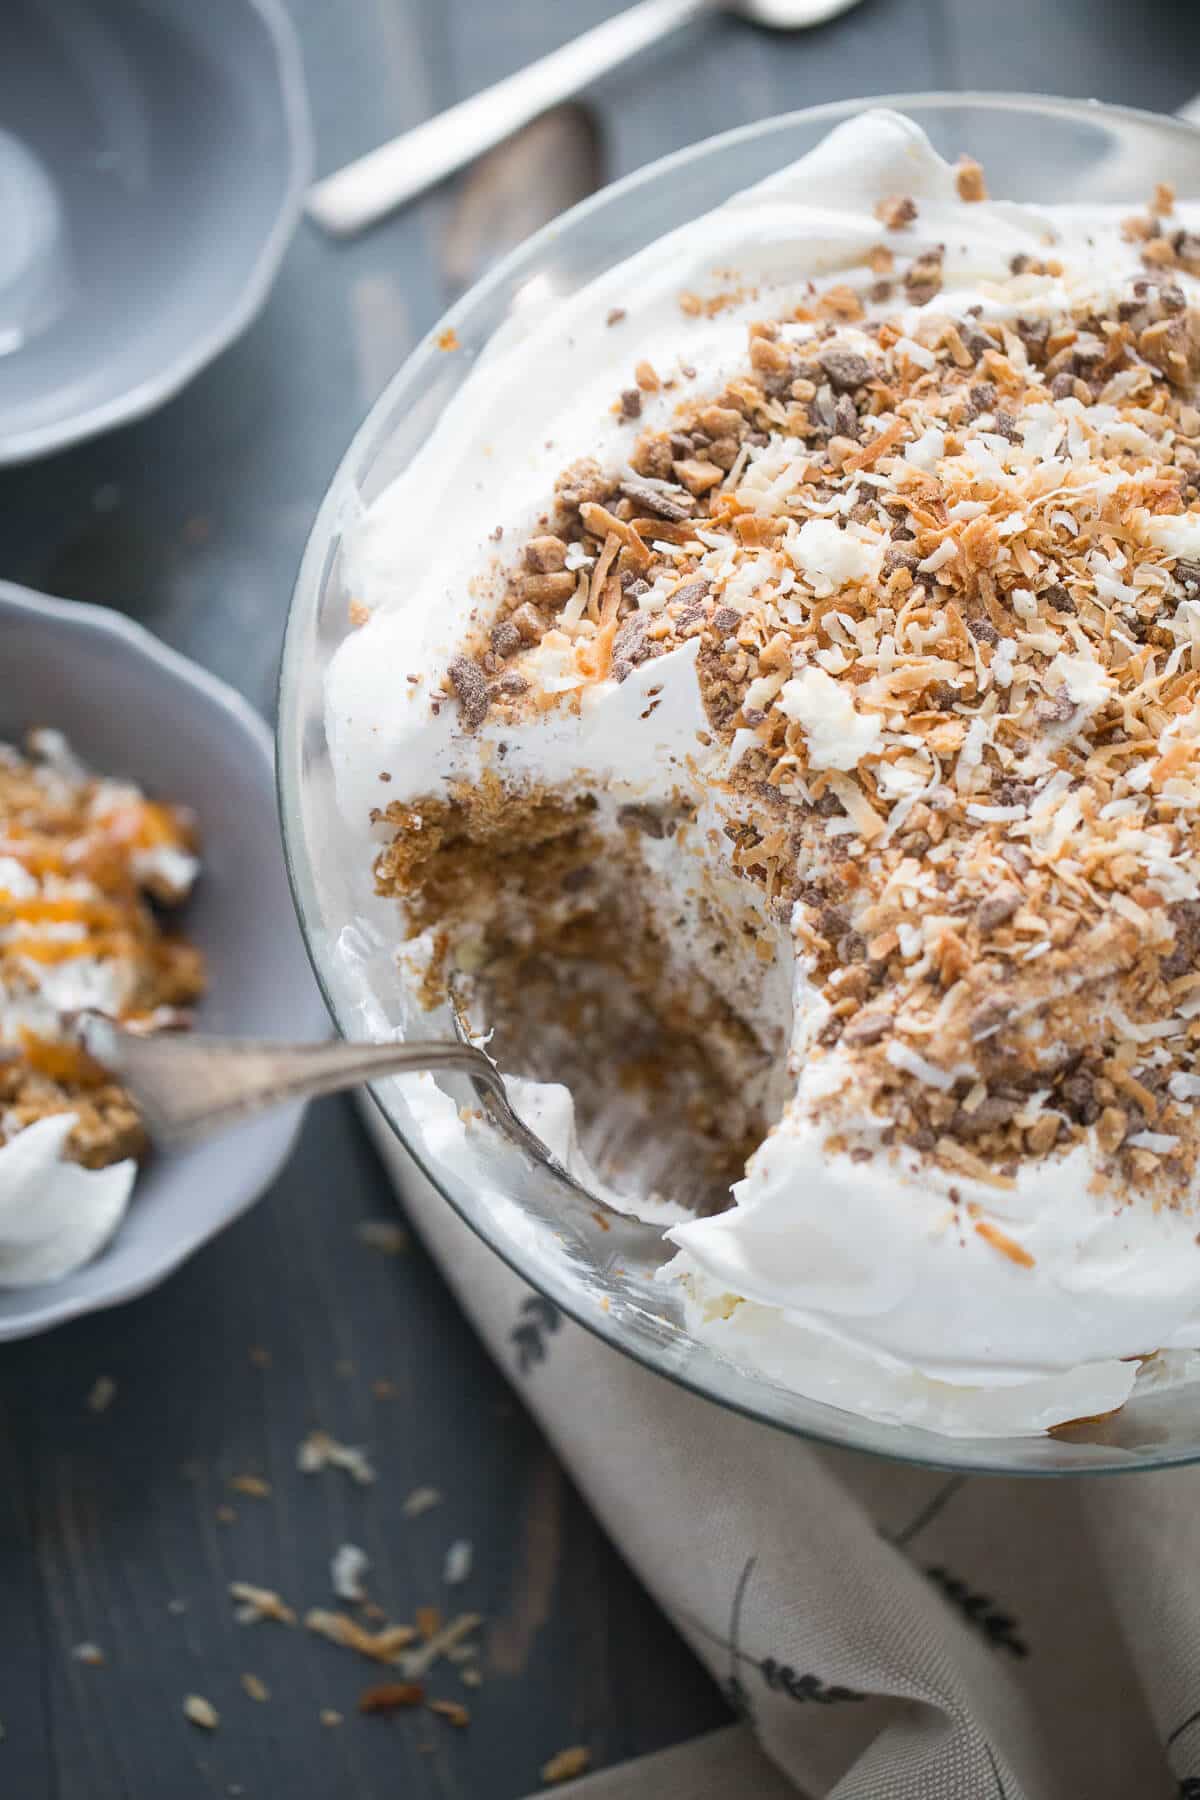 This recipe for carrot cake trifle will satisfy your carrot cake craving but with half the work!